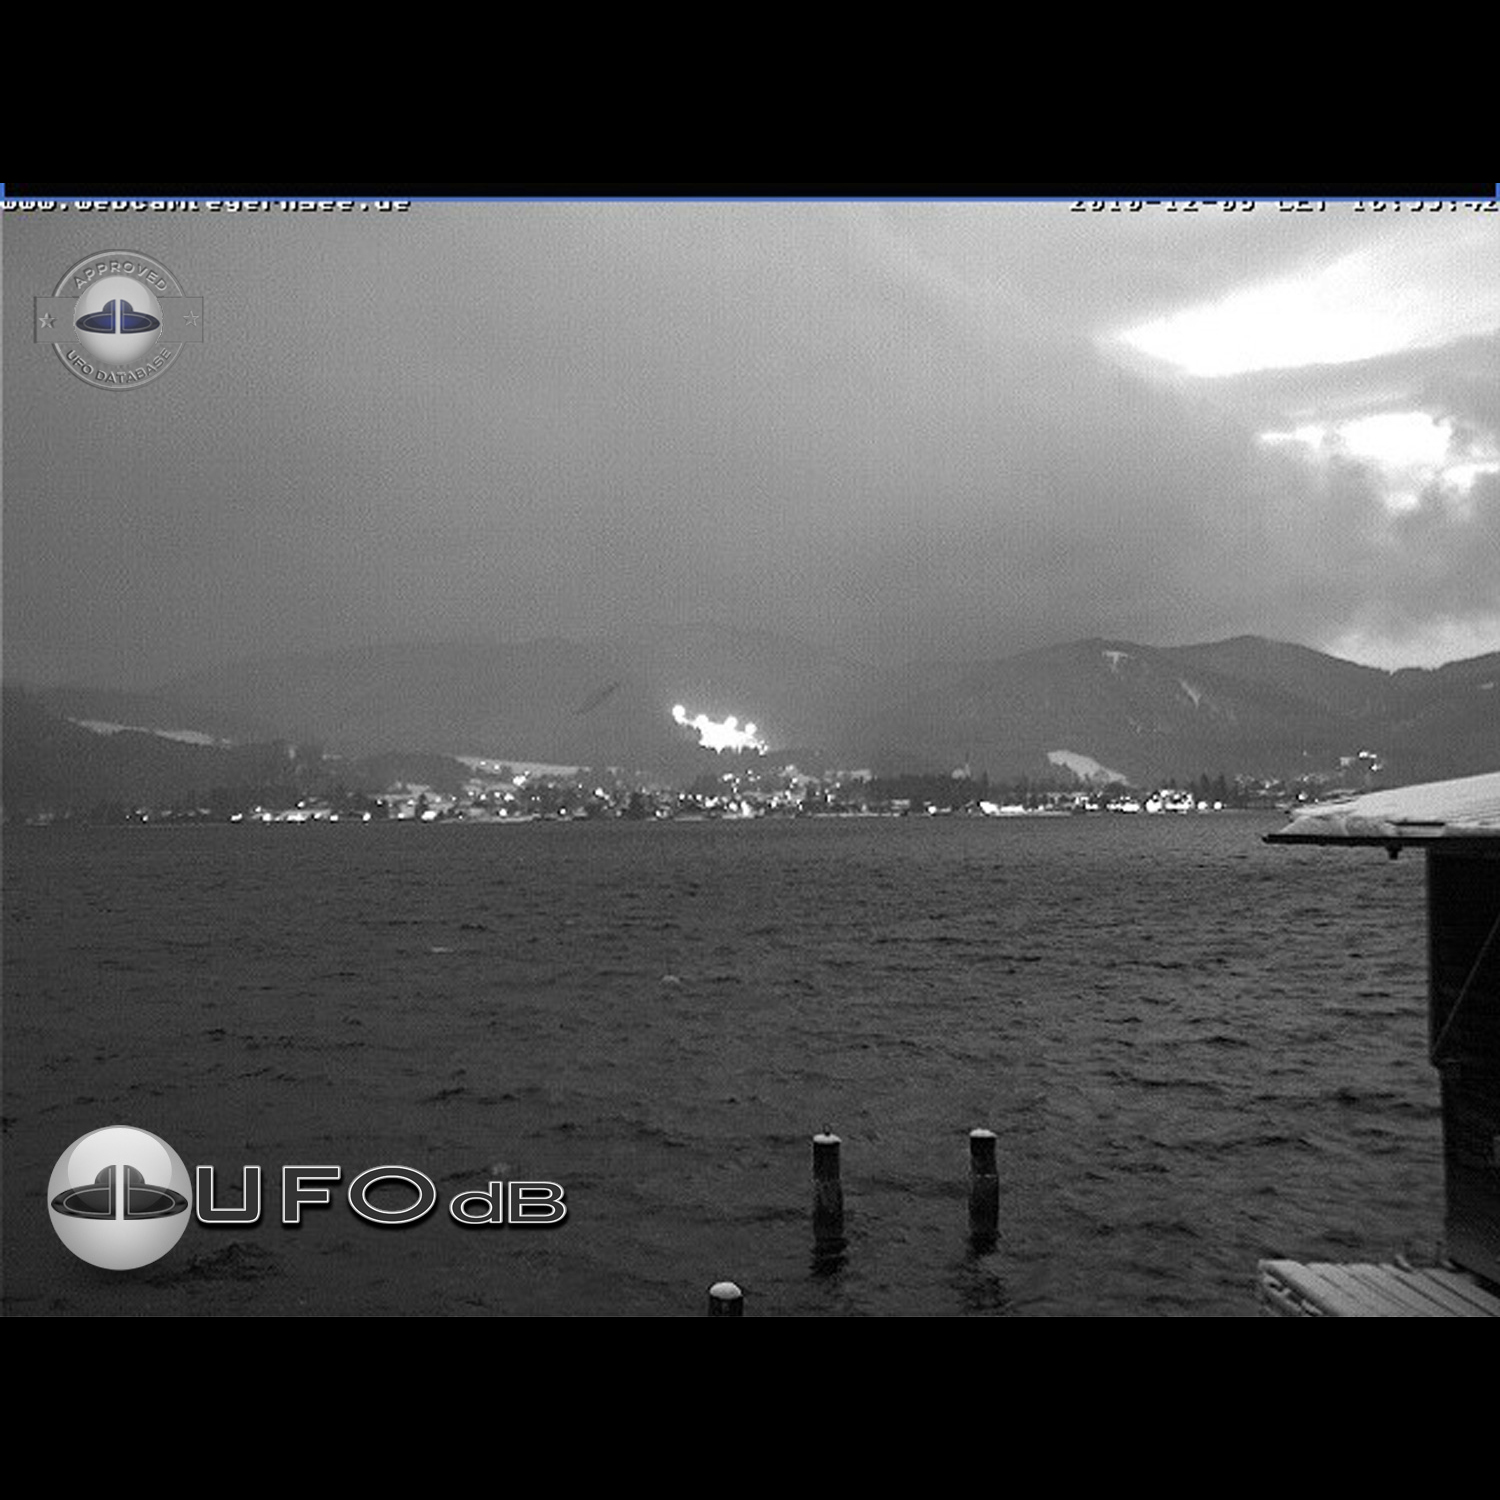 Live Cam capture of UFO USO near water surface | Geisenfeld, Germany UFO Picture #203-1